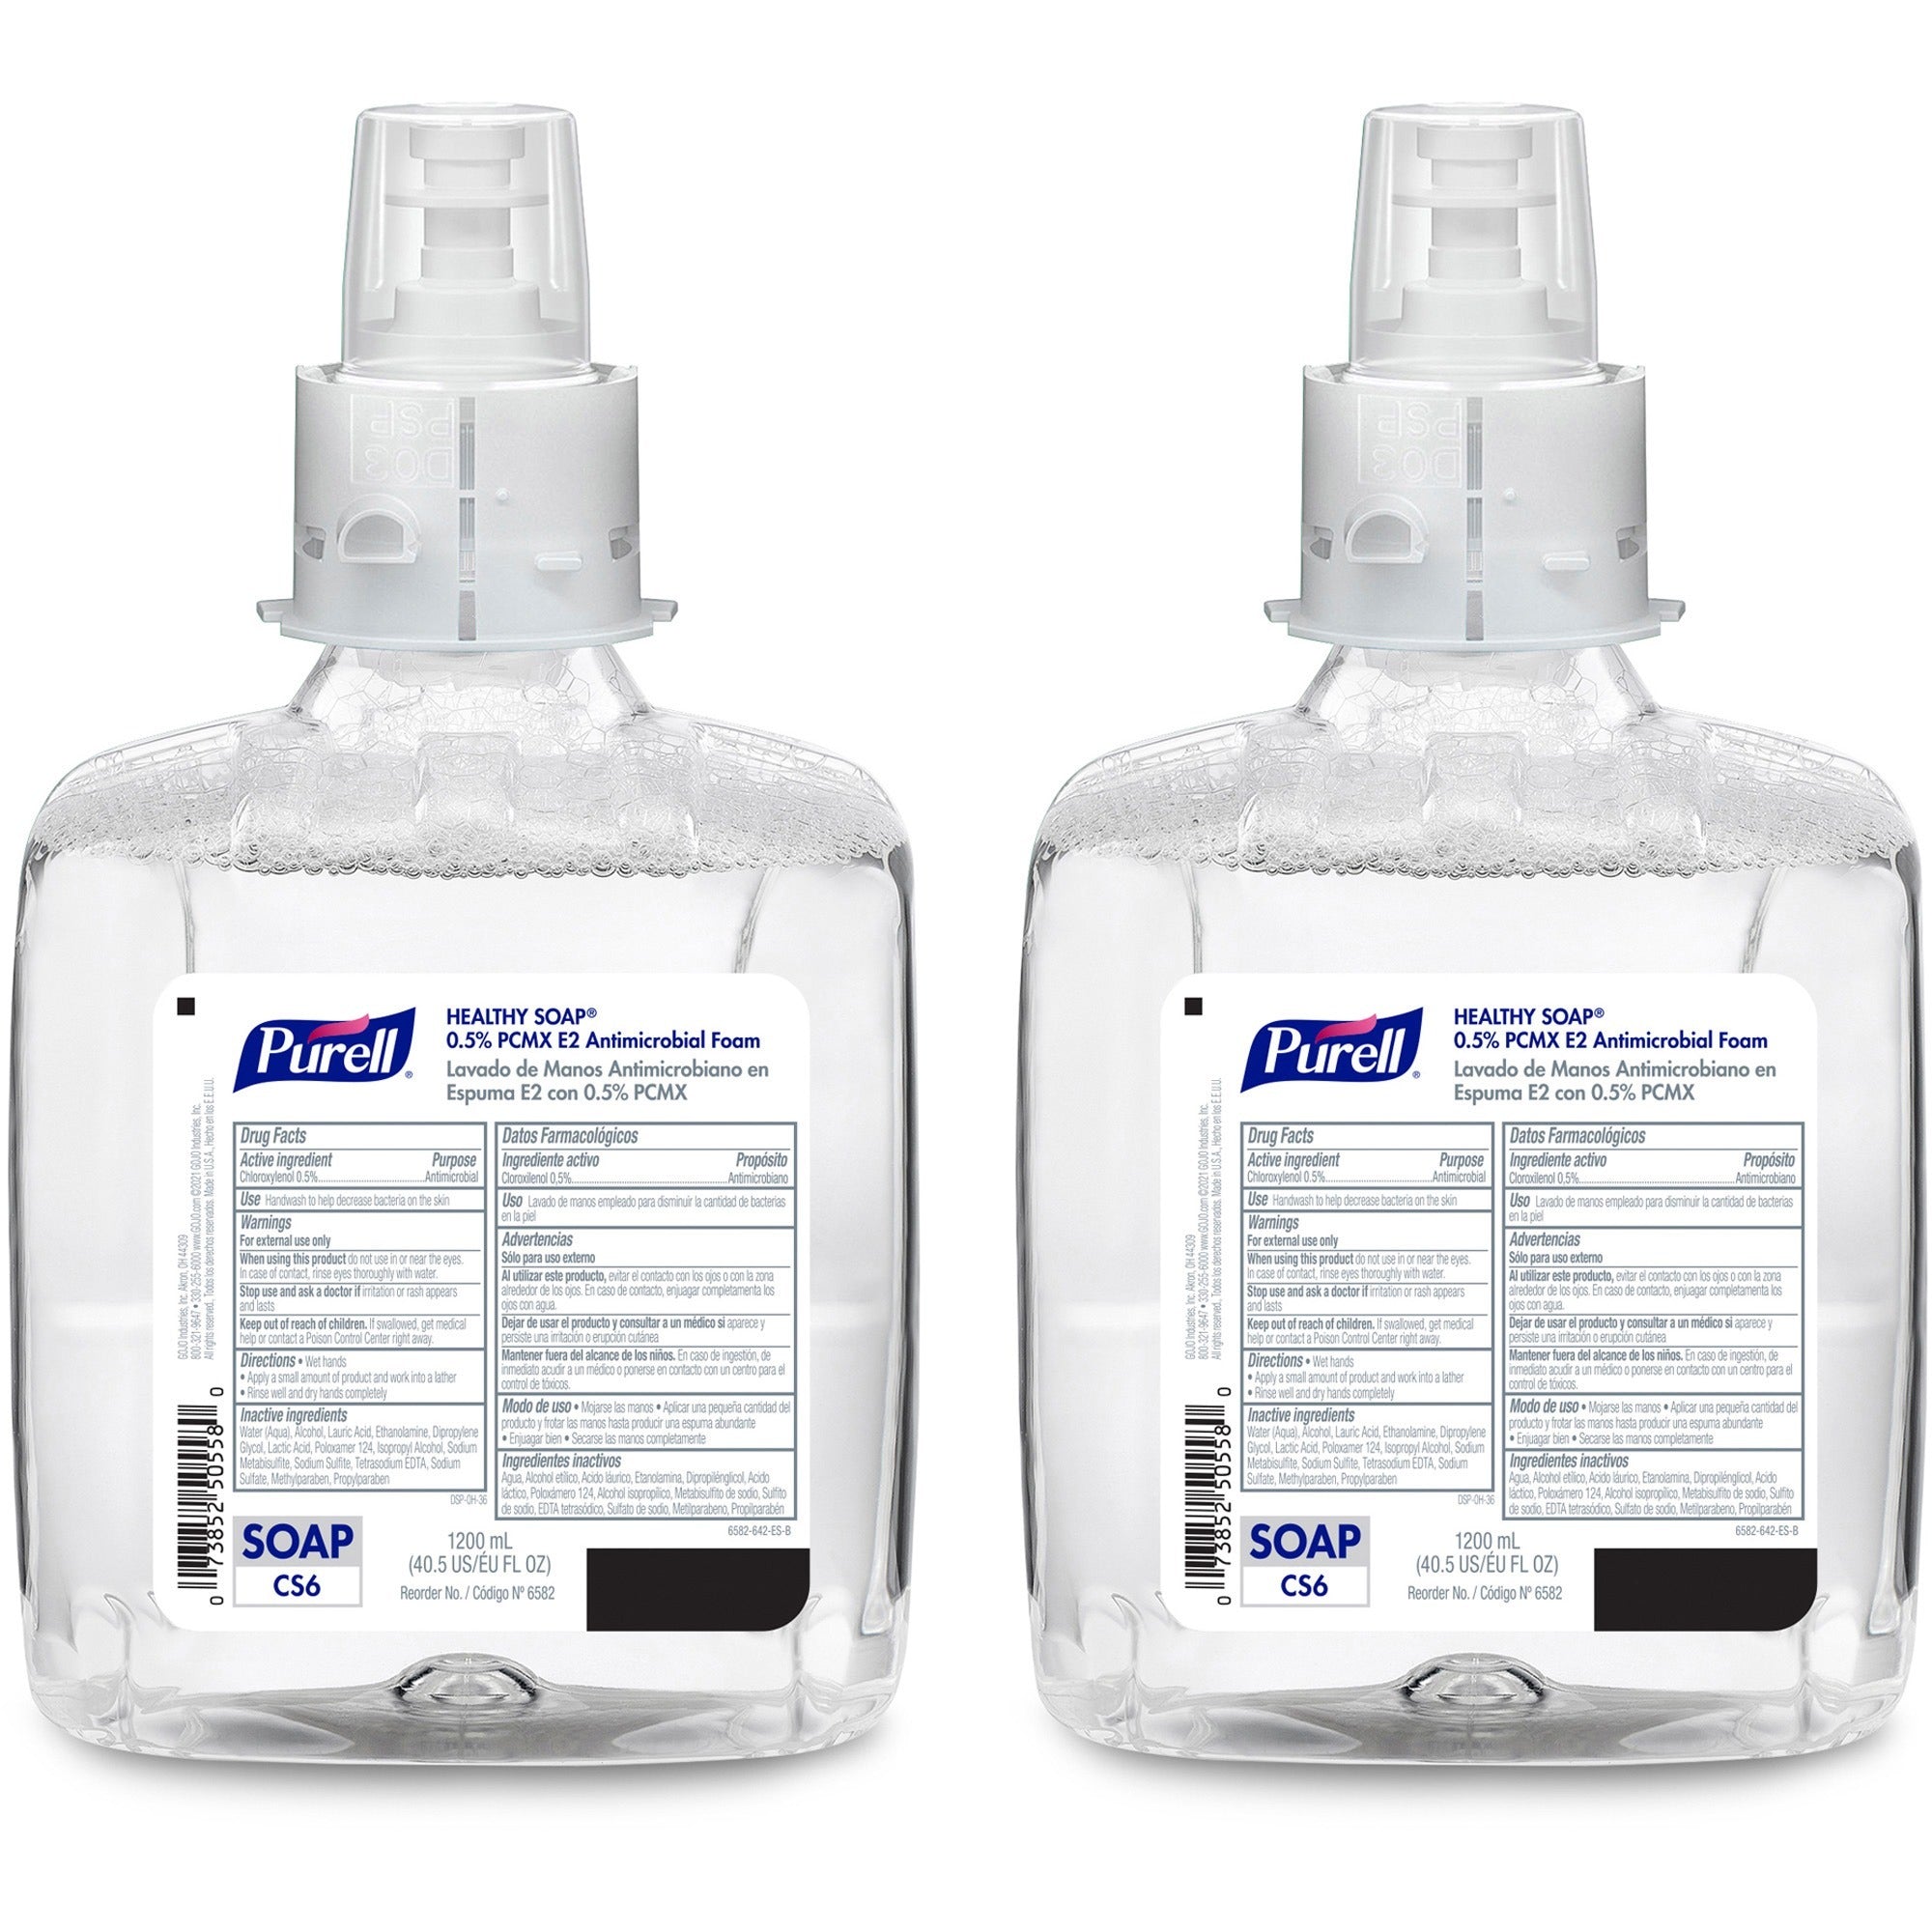 purell-cs6-pcmx-antimicrobial-e2-hand-foam-light-floral-scentfor-406-fl-oz-1200-ml-kill-germs-bacteria-remover-soil-remover-oil-remover-food-processing-industry-hand-dye-free-fragrance-free-hygienic-2-carton_goj658202 - 1